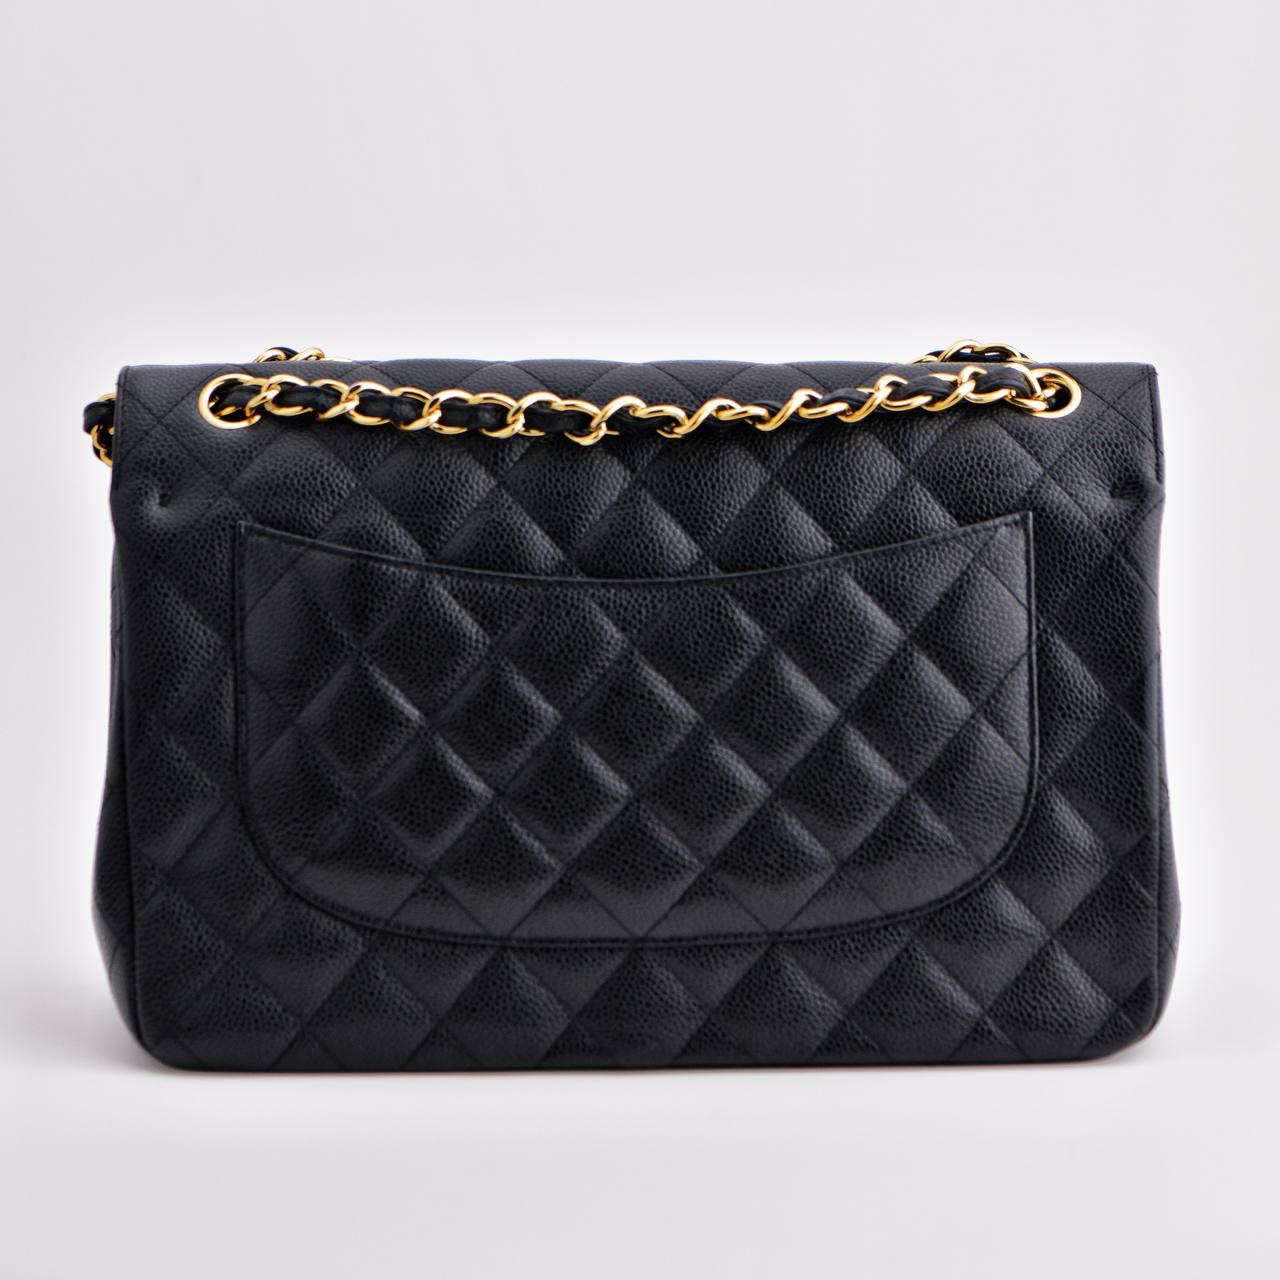 CHANEL Jumbo Black Calfskin Caviar Double Flap Bag with GHW For Sale 6